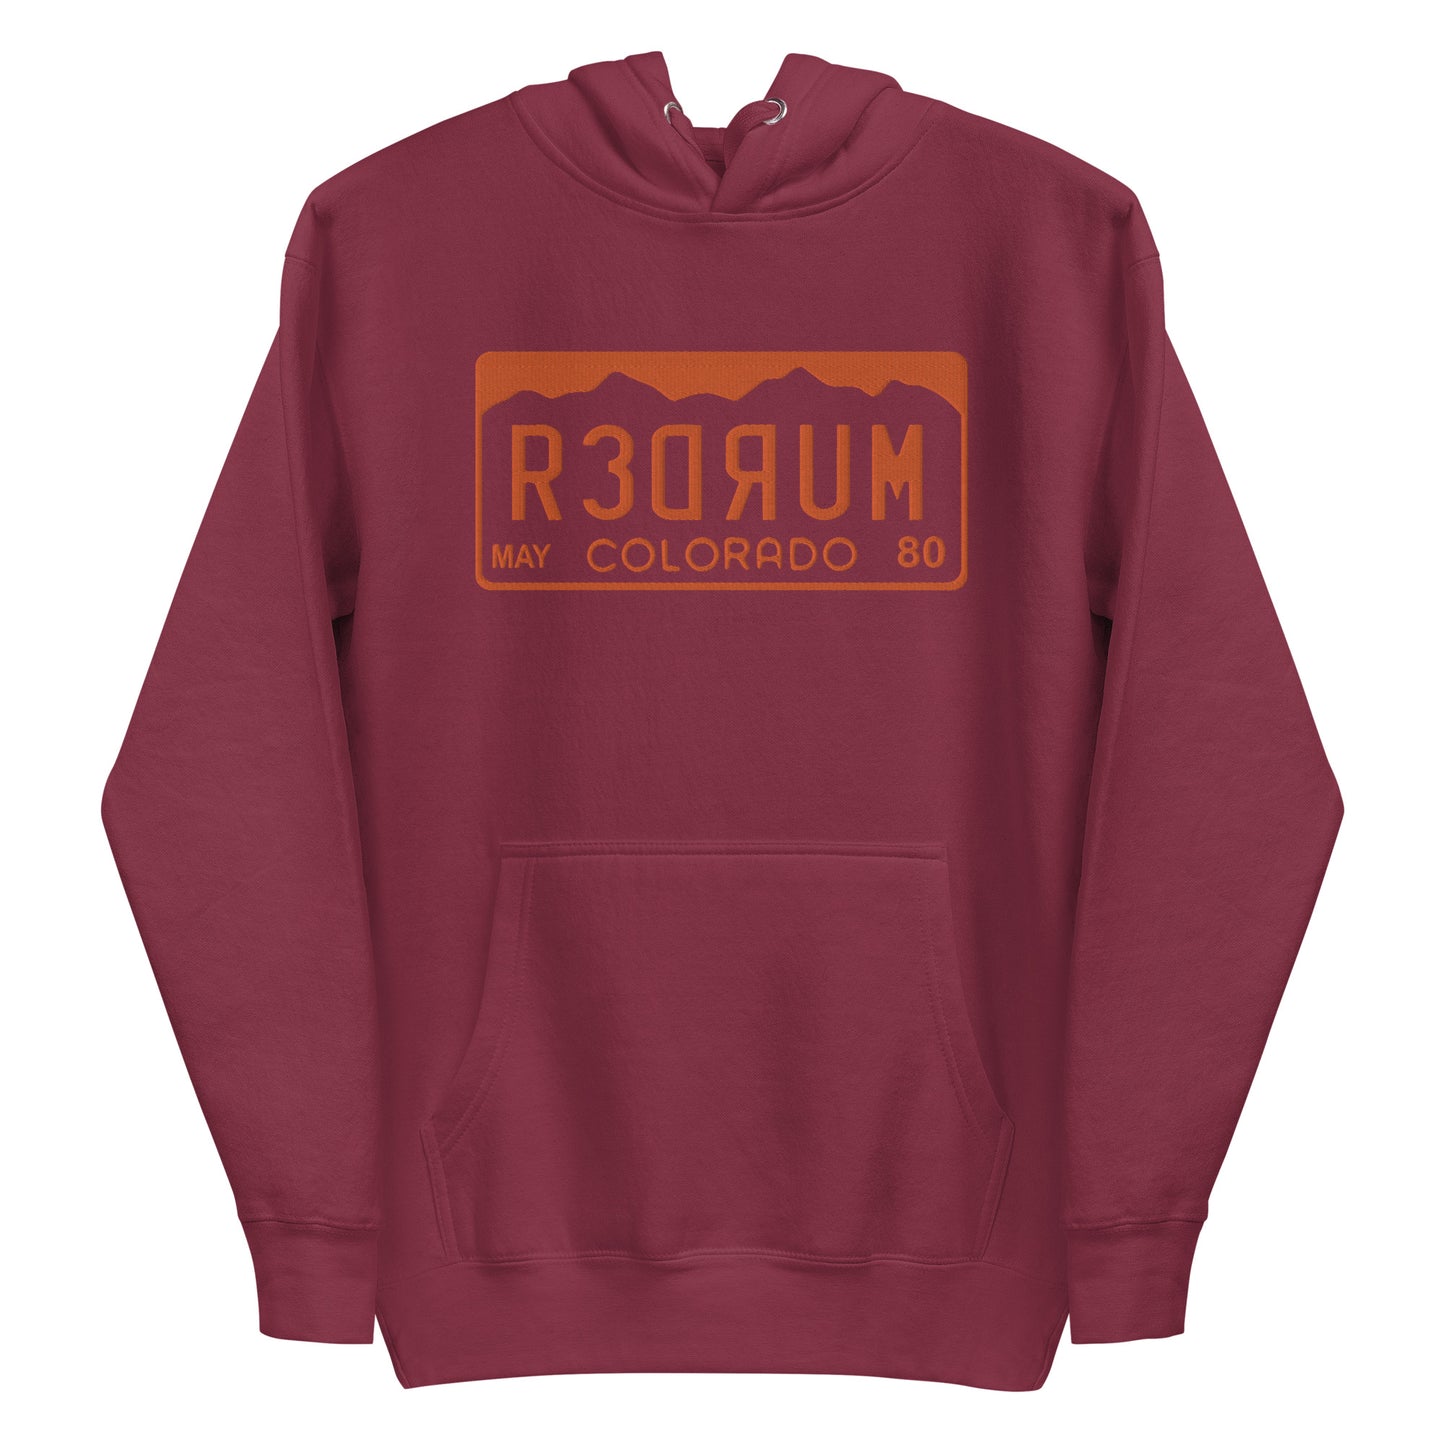 REDRUM embroidered hoodie